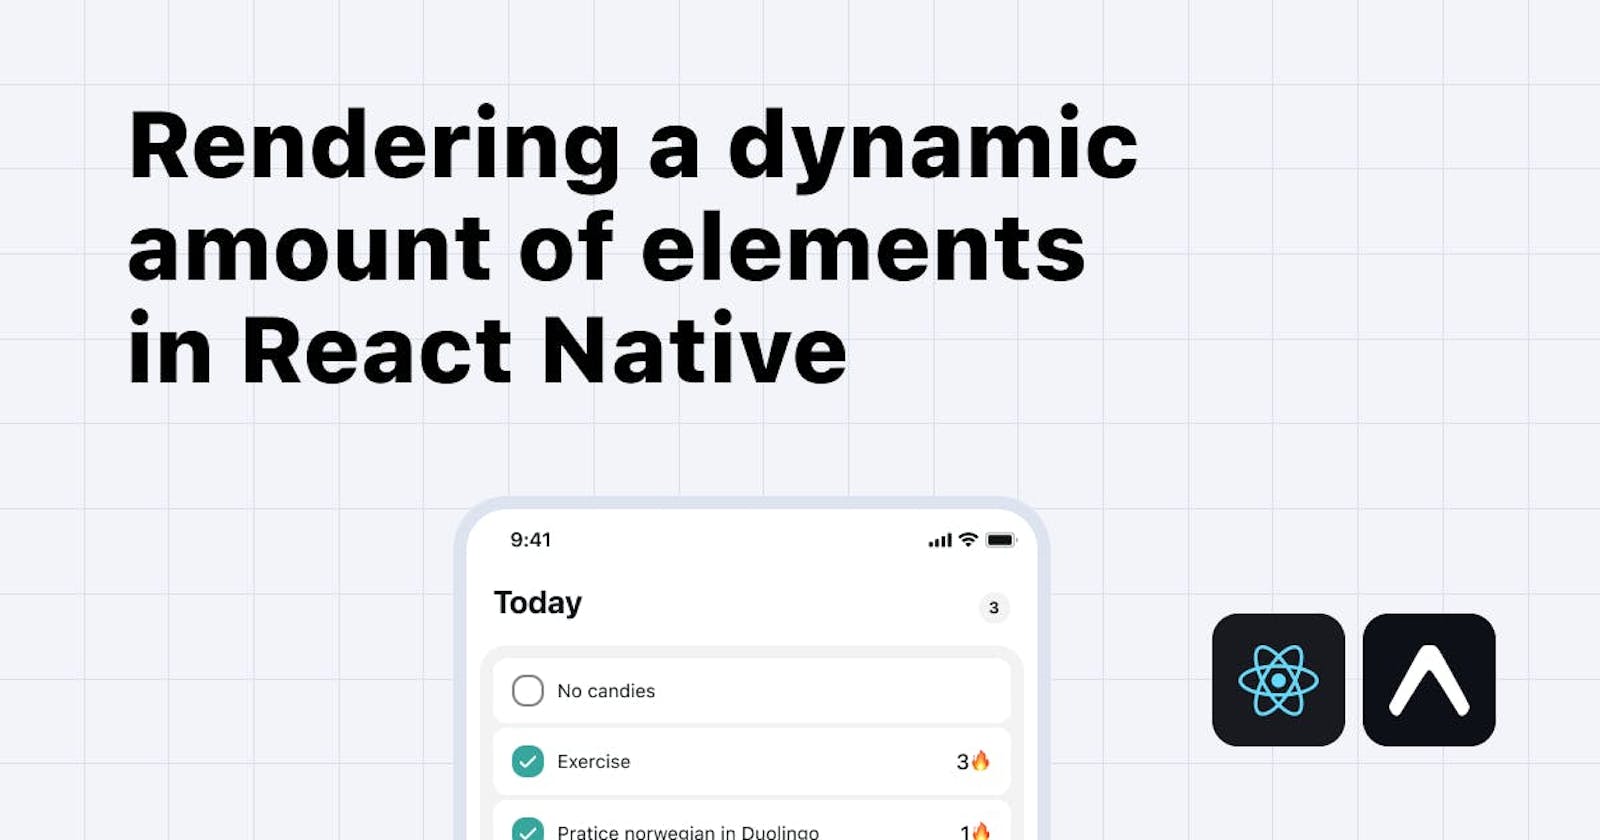 Rendering a dynamic amount of elements in React Native